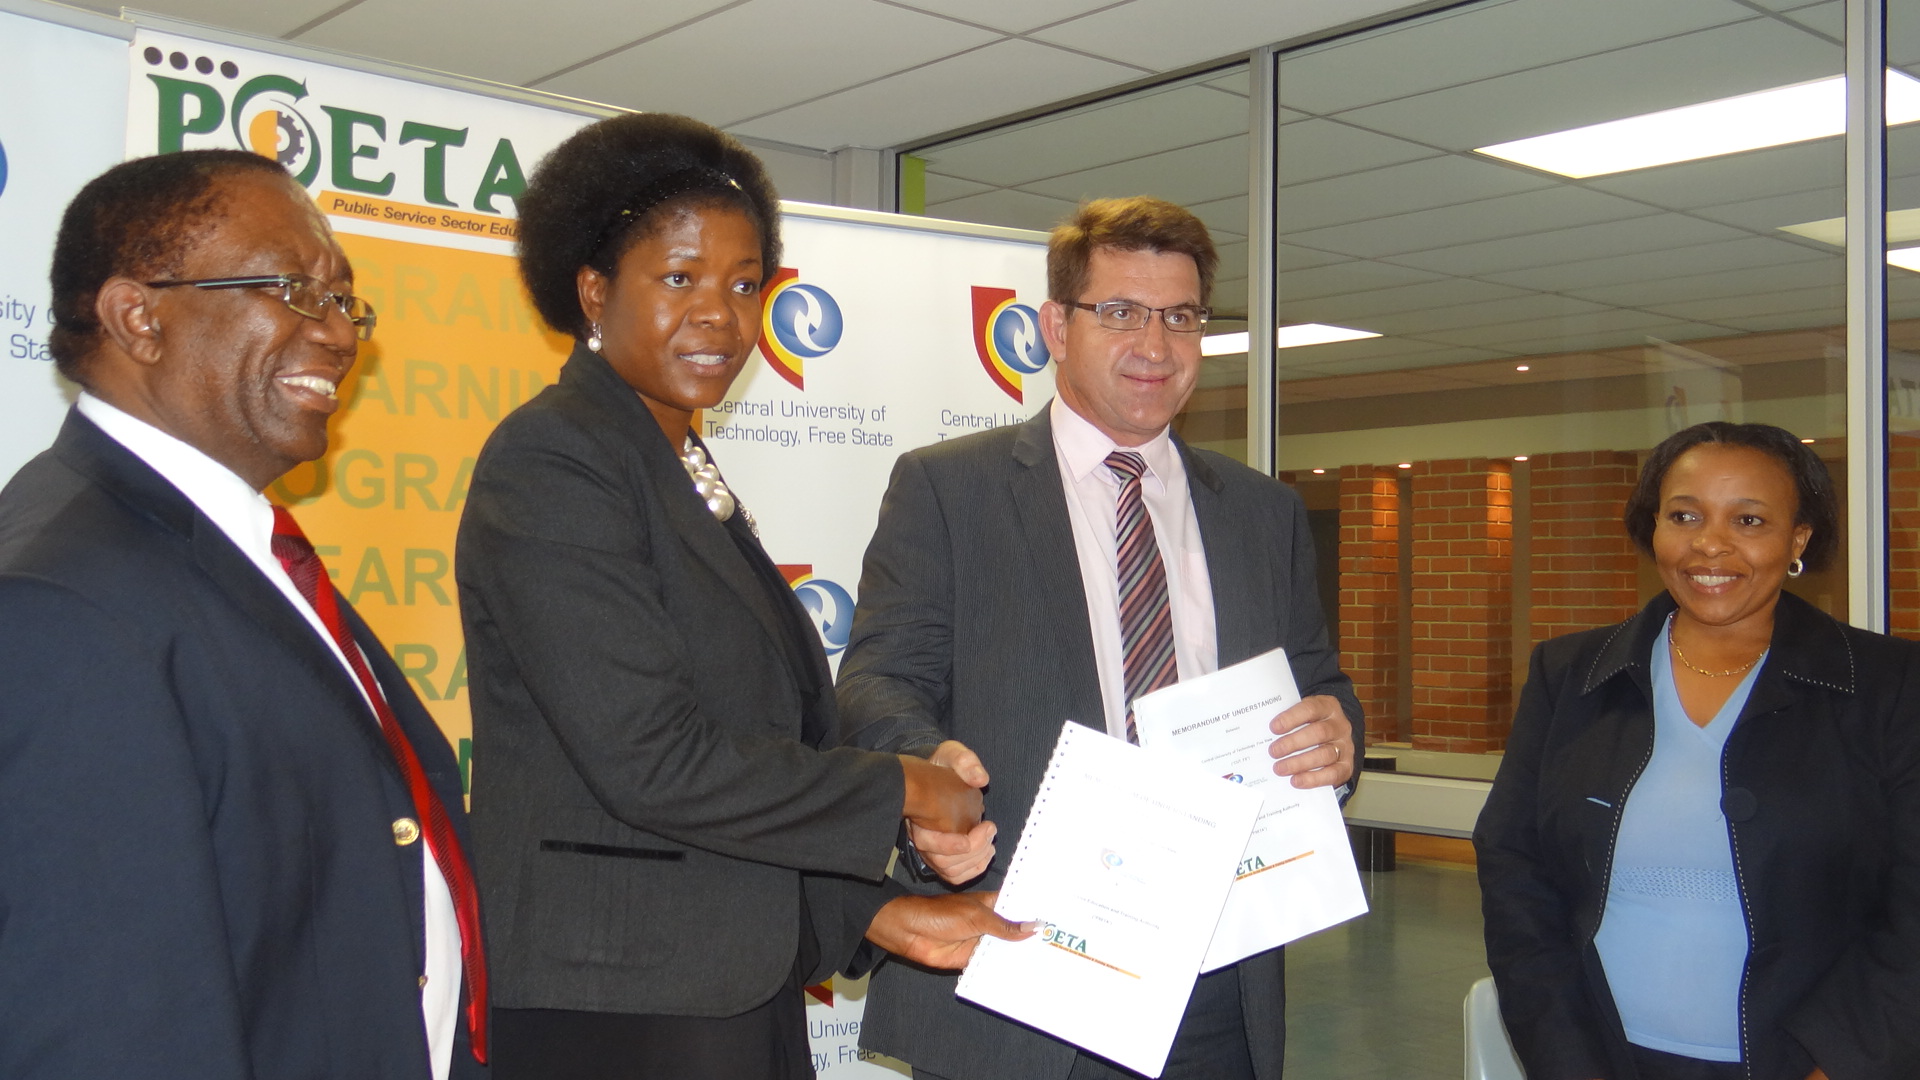 FS Provincial Government and PSETA in conjunction with CUT launch an integrated learning programme